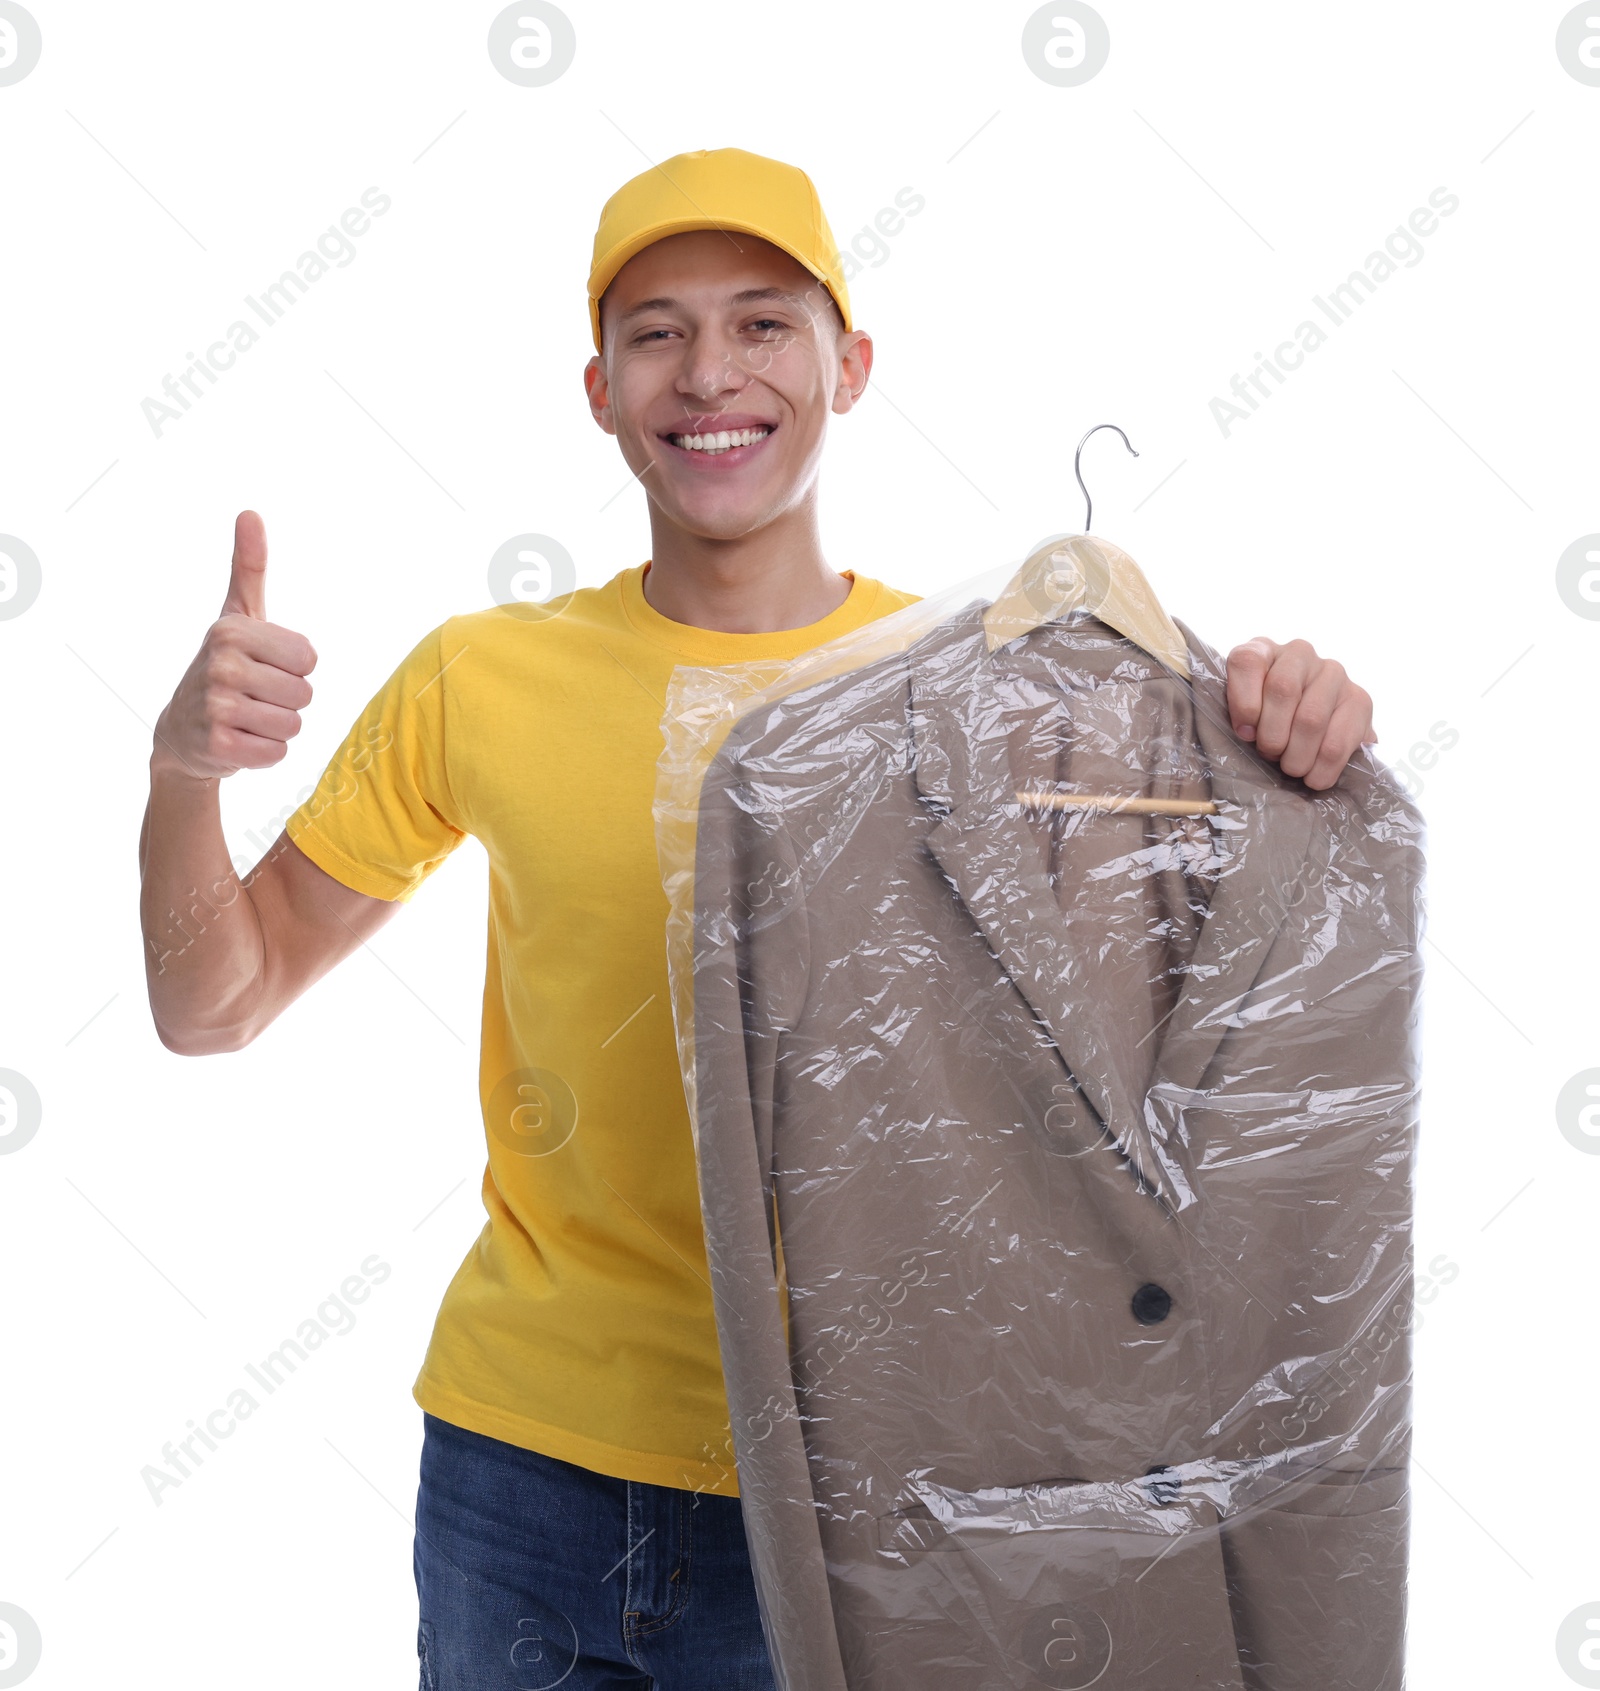 Photo of Dry-cleaning delivery. Happy courier holding jacket in plastic bag and showing thumbs up on white background